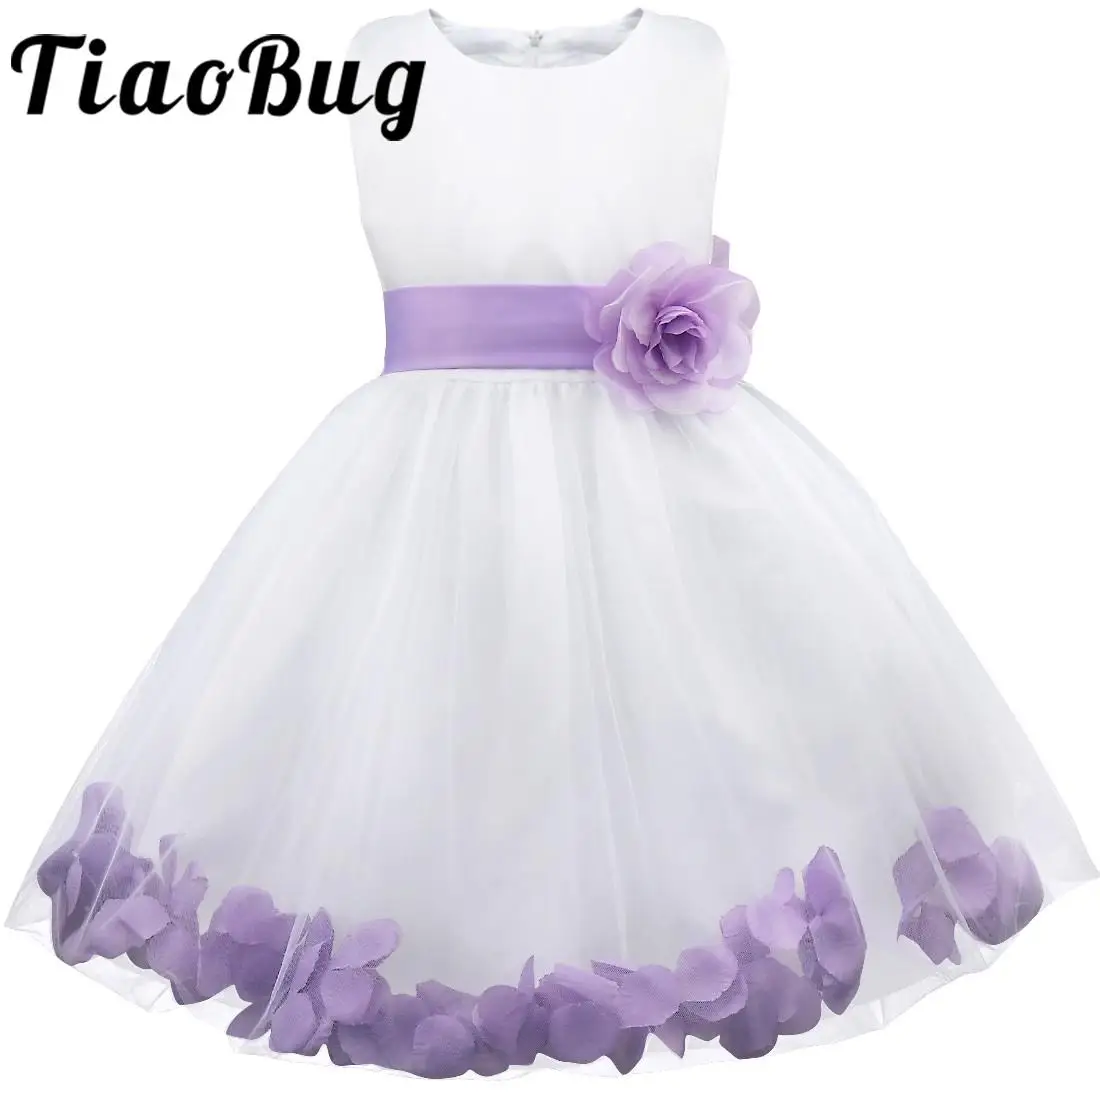 

Kids Flower Girls Princess Dress Petals Tulle Formal Pageant Bridal Wedding Birthday Party Dresses Bridesmaid Prom Ball Gown